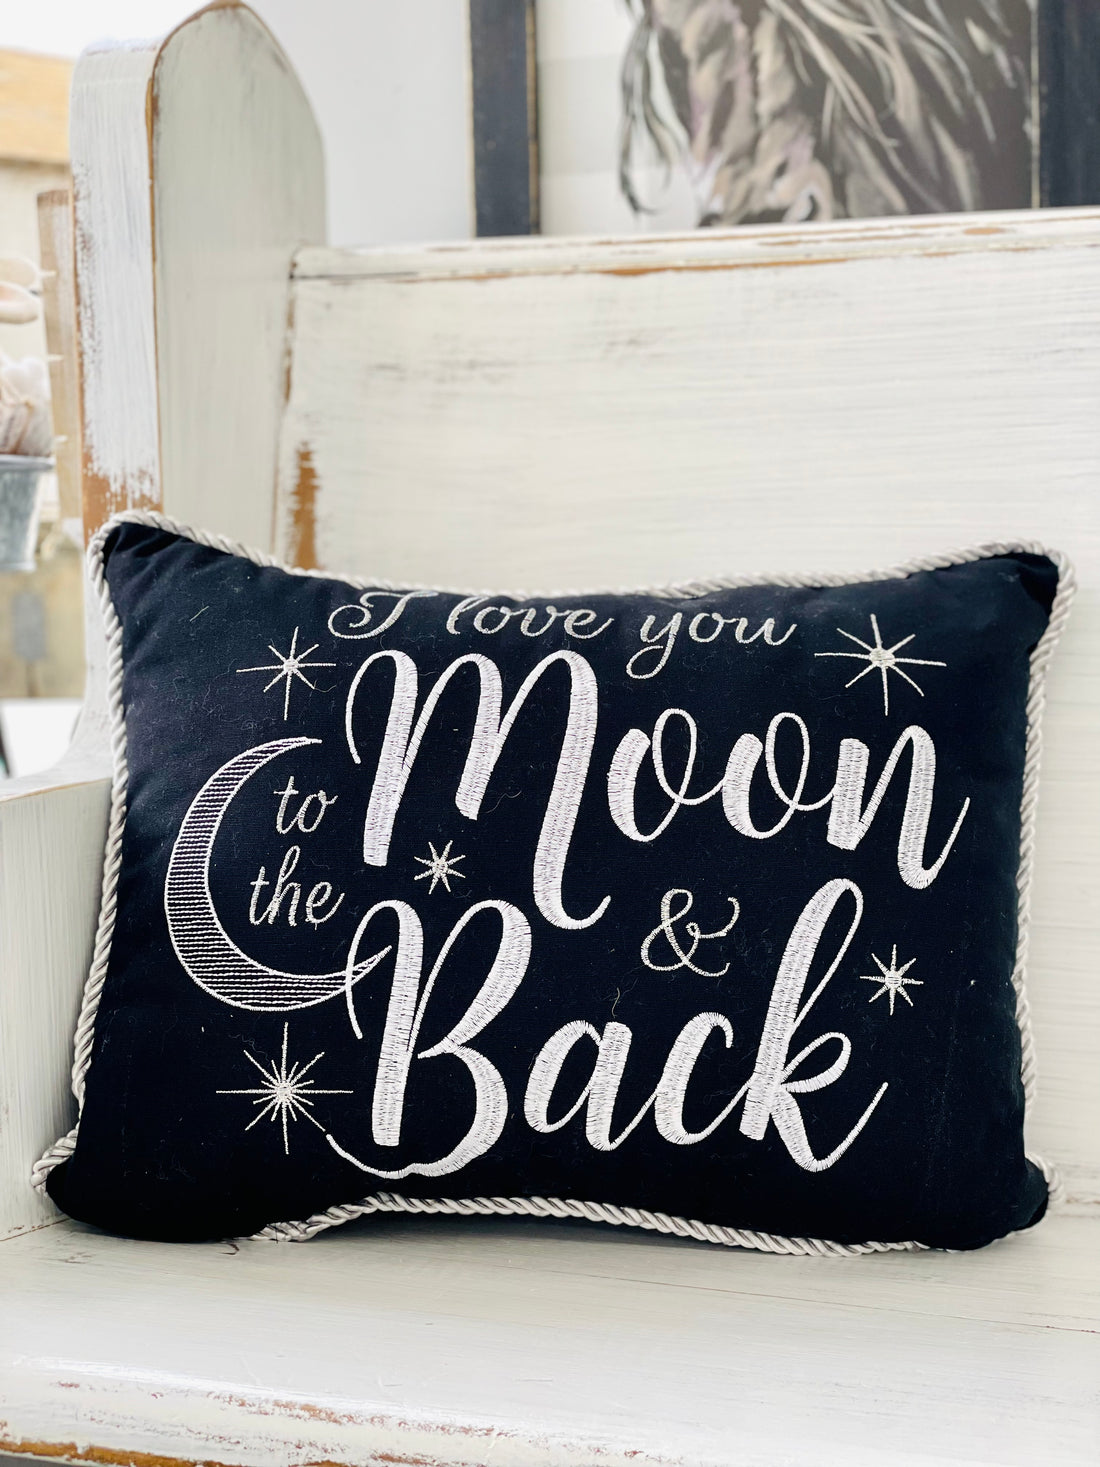 I Love You to The Moon & Back Pillow